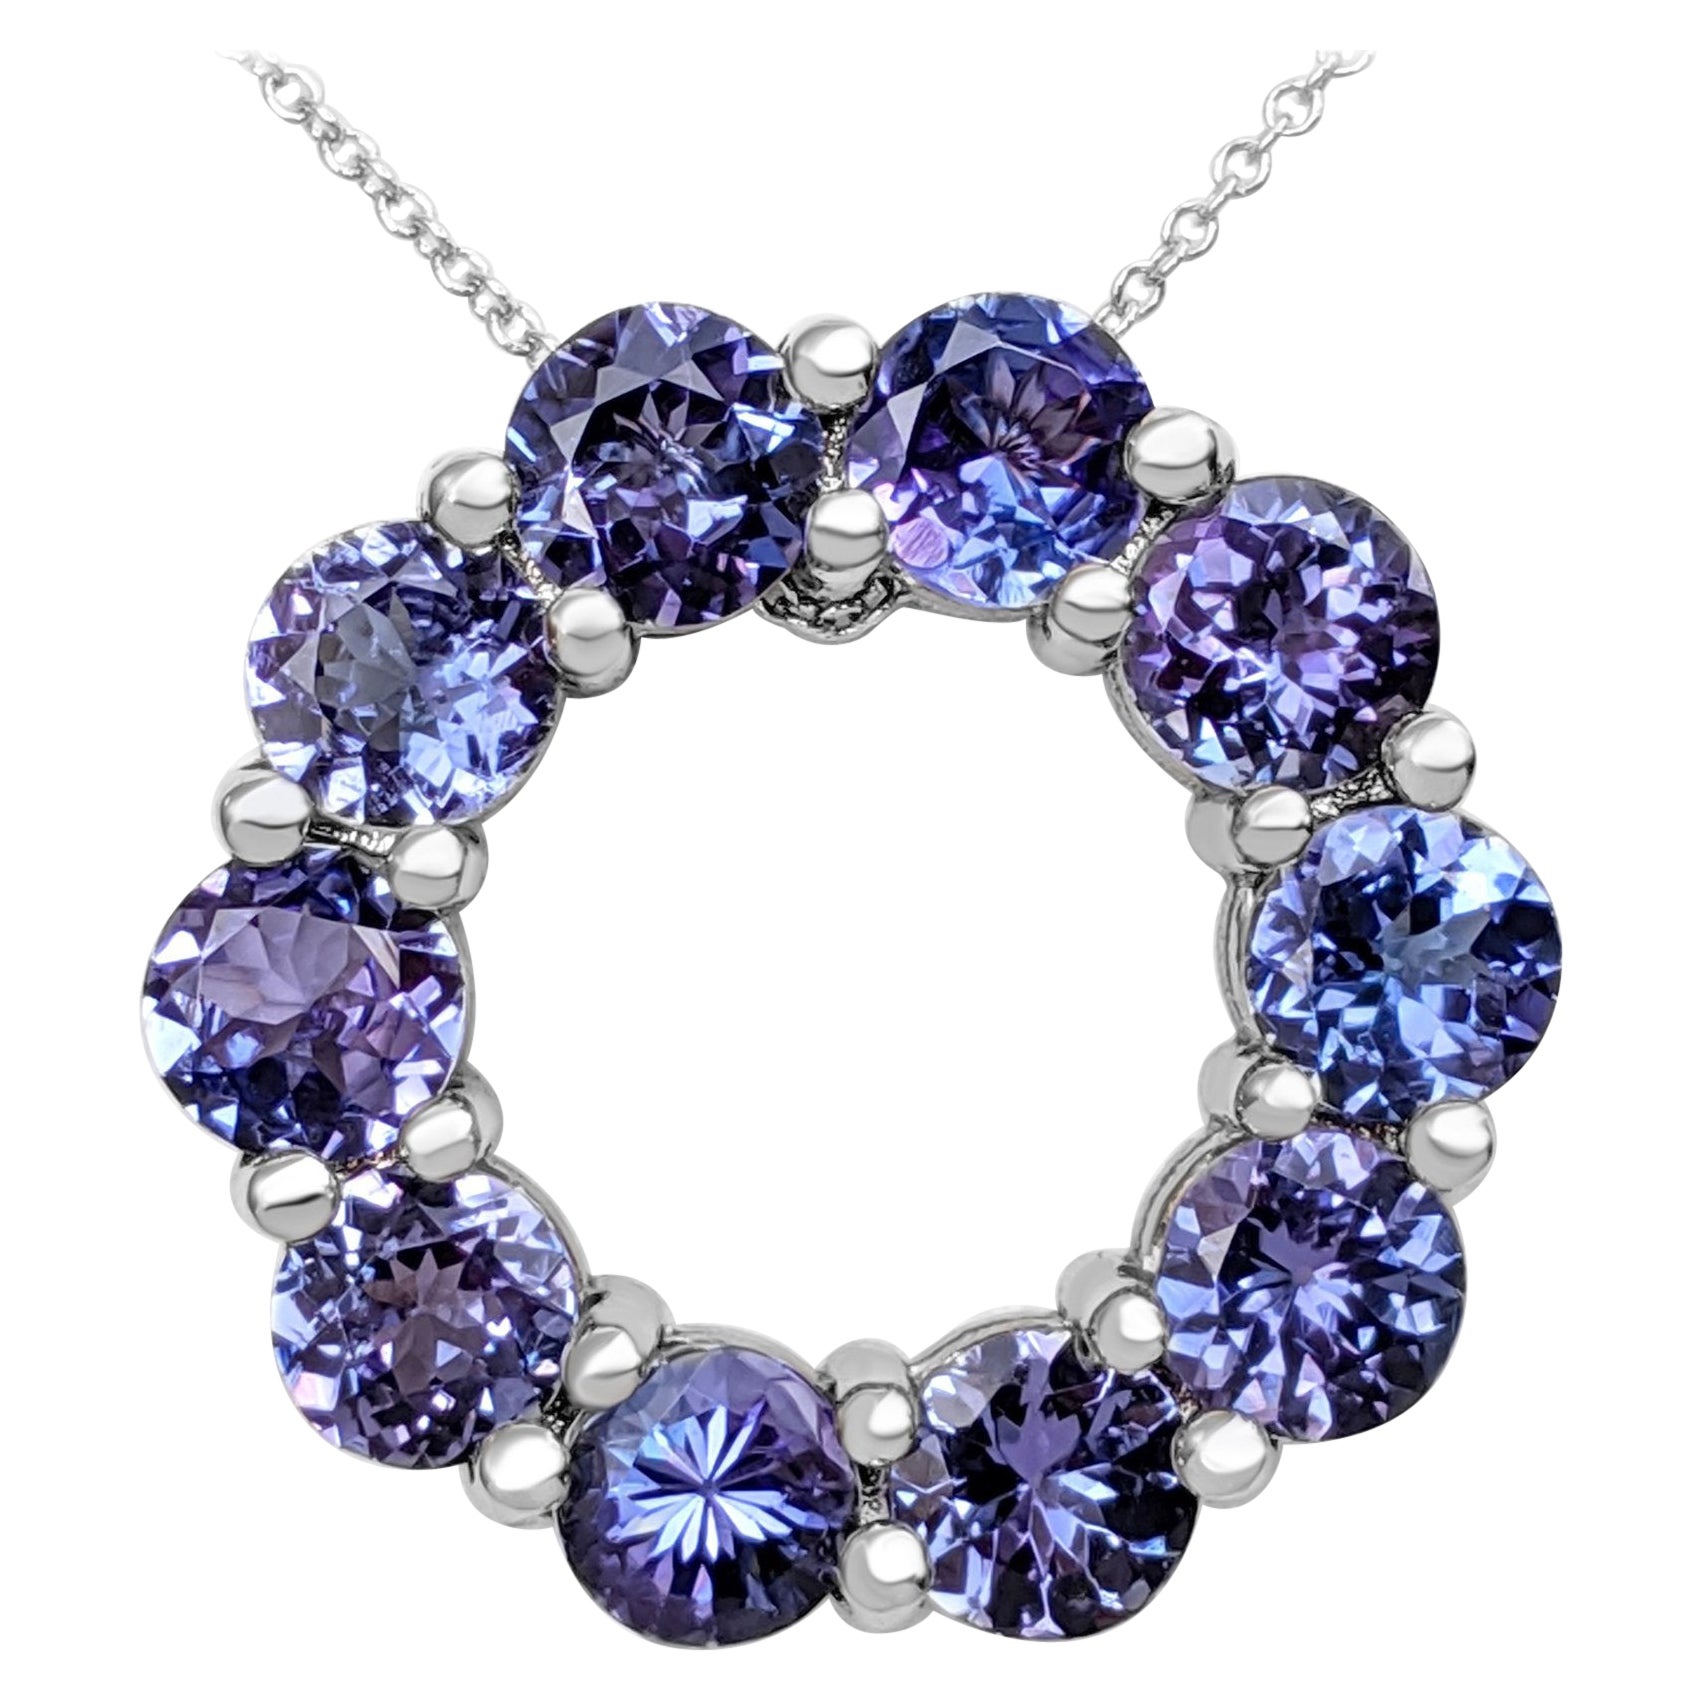 $1 NO RESERVE!   5.23cttw Tanzanite, 14K White Gold Necklace With Pendant For Sale